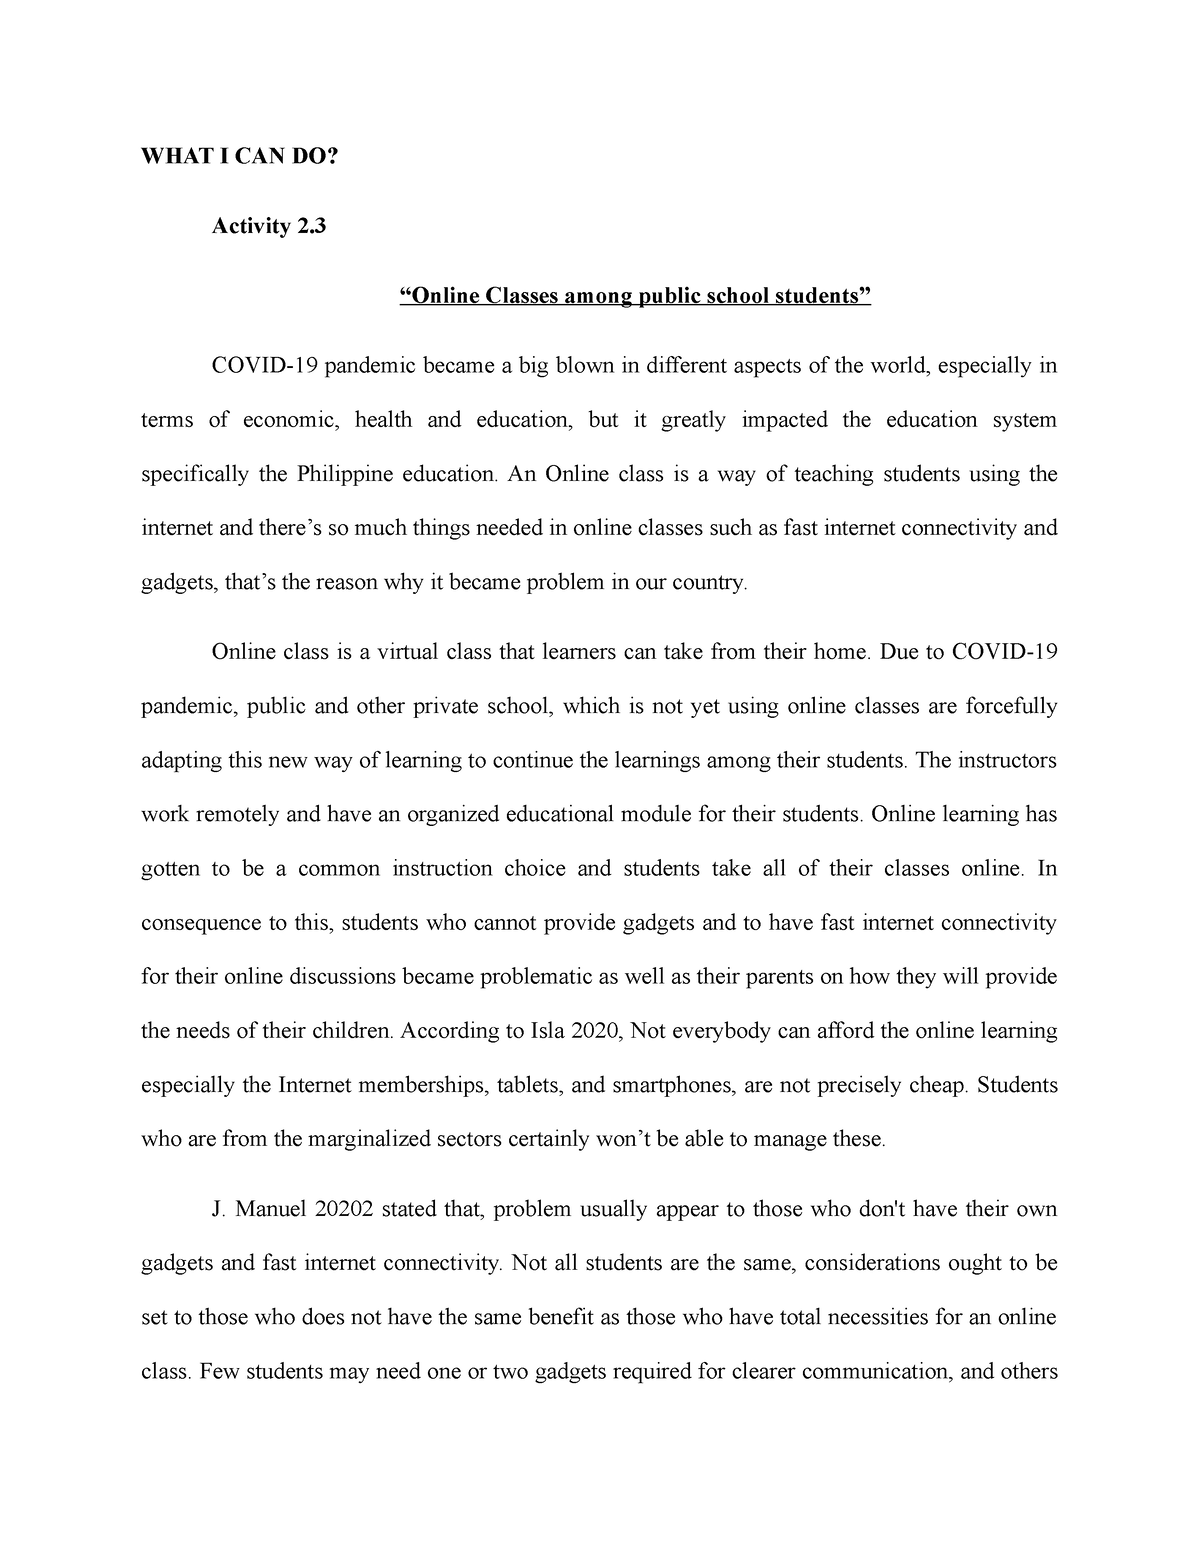 example of position paper about new normal education